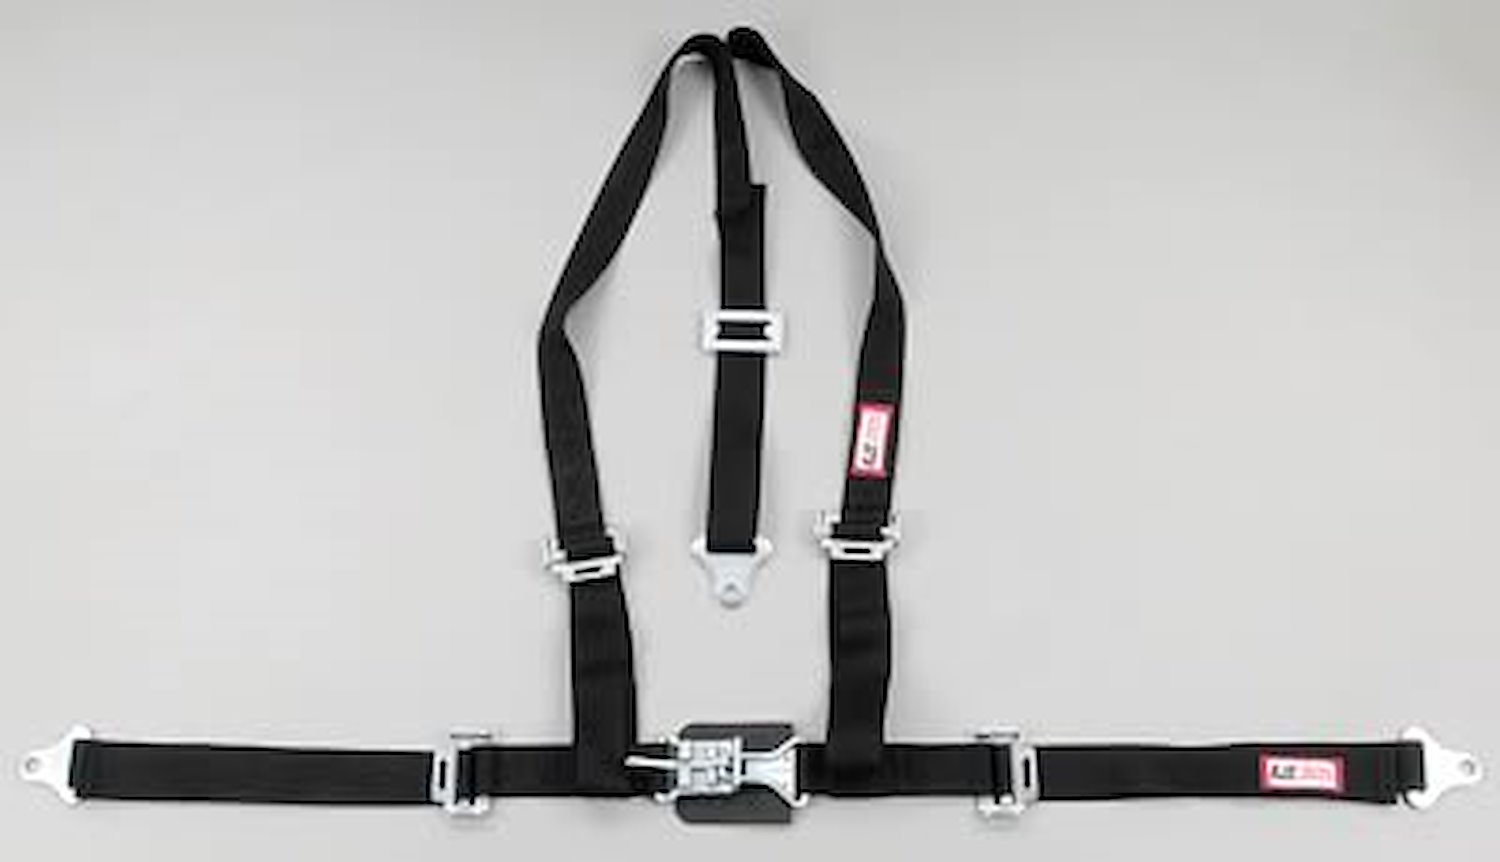 NON-SFI L&L HARNESS 3 PULL DOWN Lap Belt w/adjuster 2 S.H. V ROLL BAR Mount w/STERNUM STRAP ALL SNAP ENDS GRAY